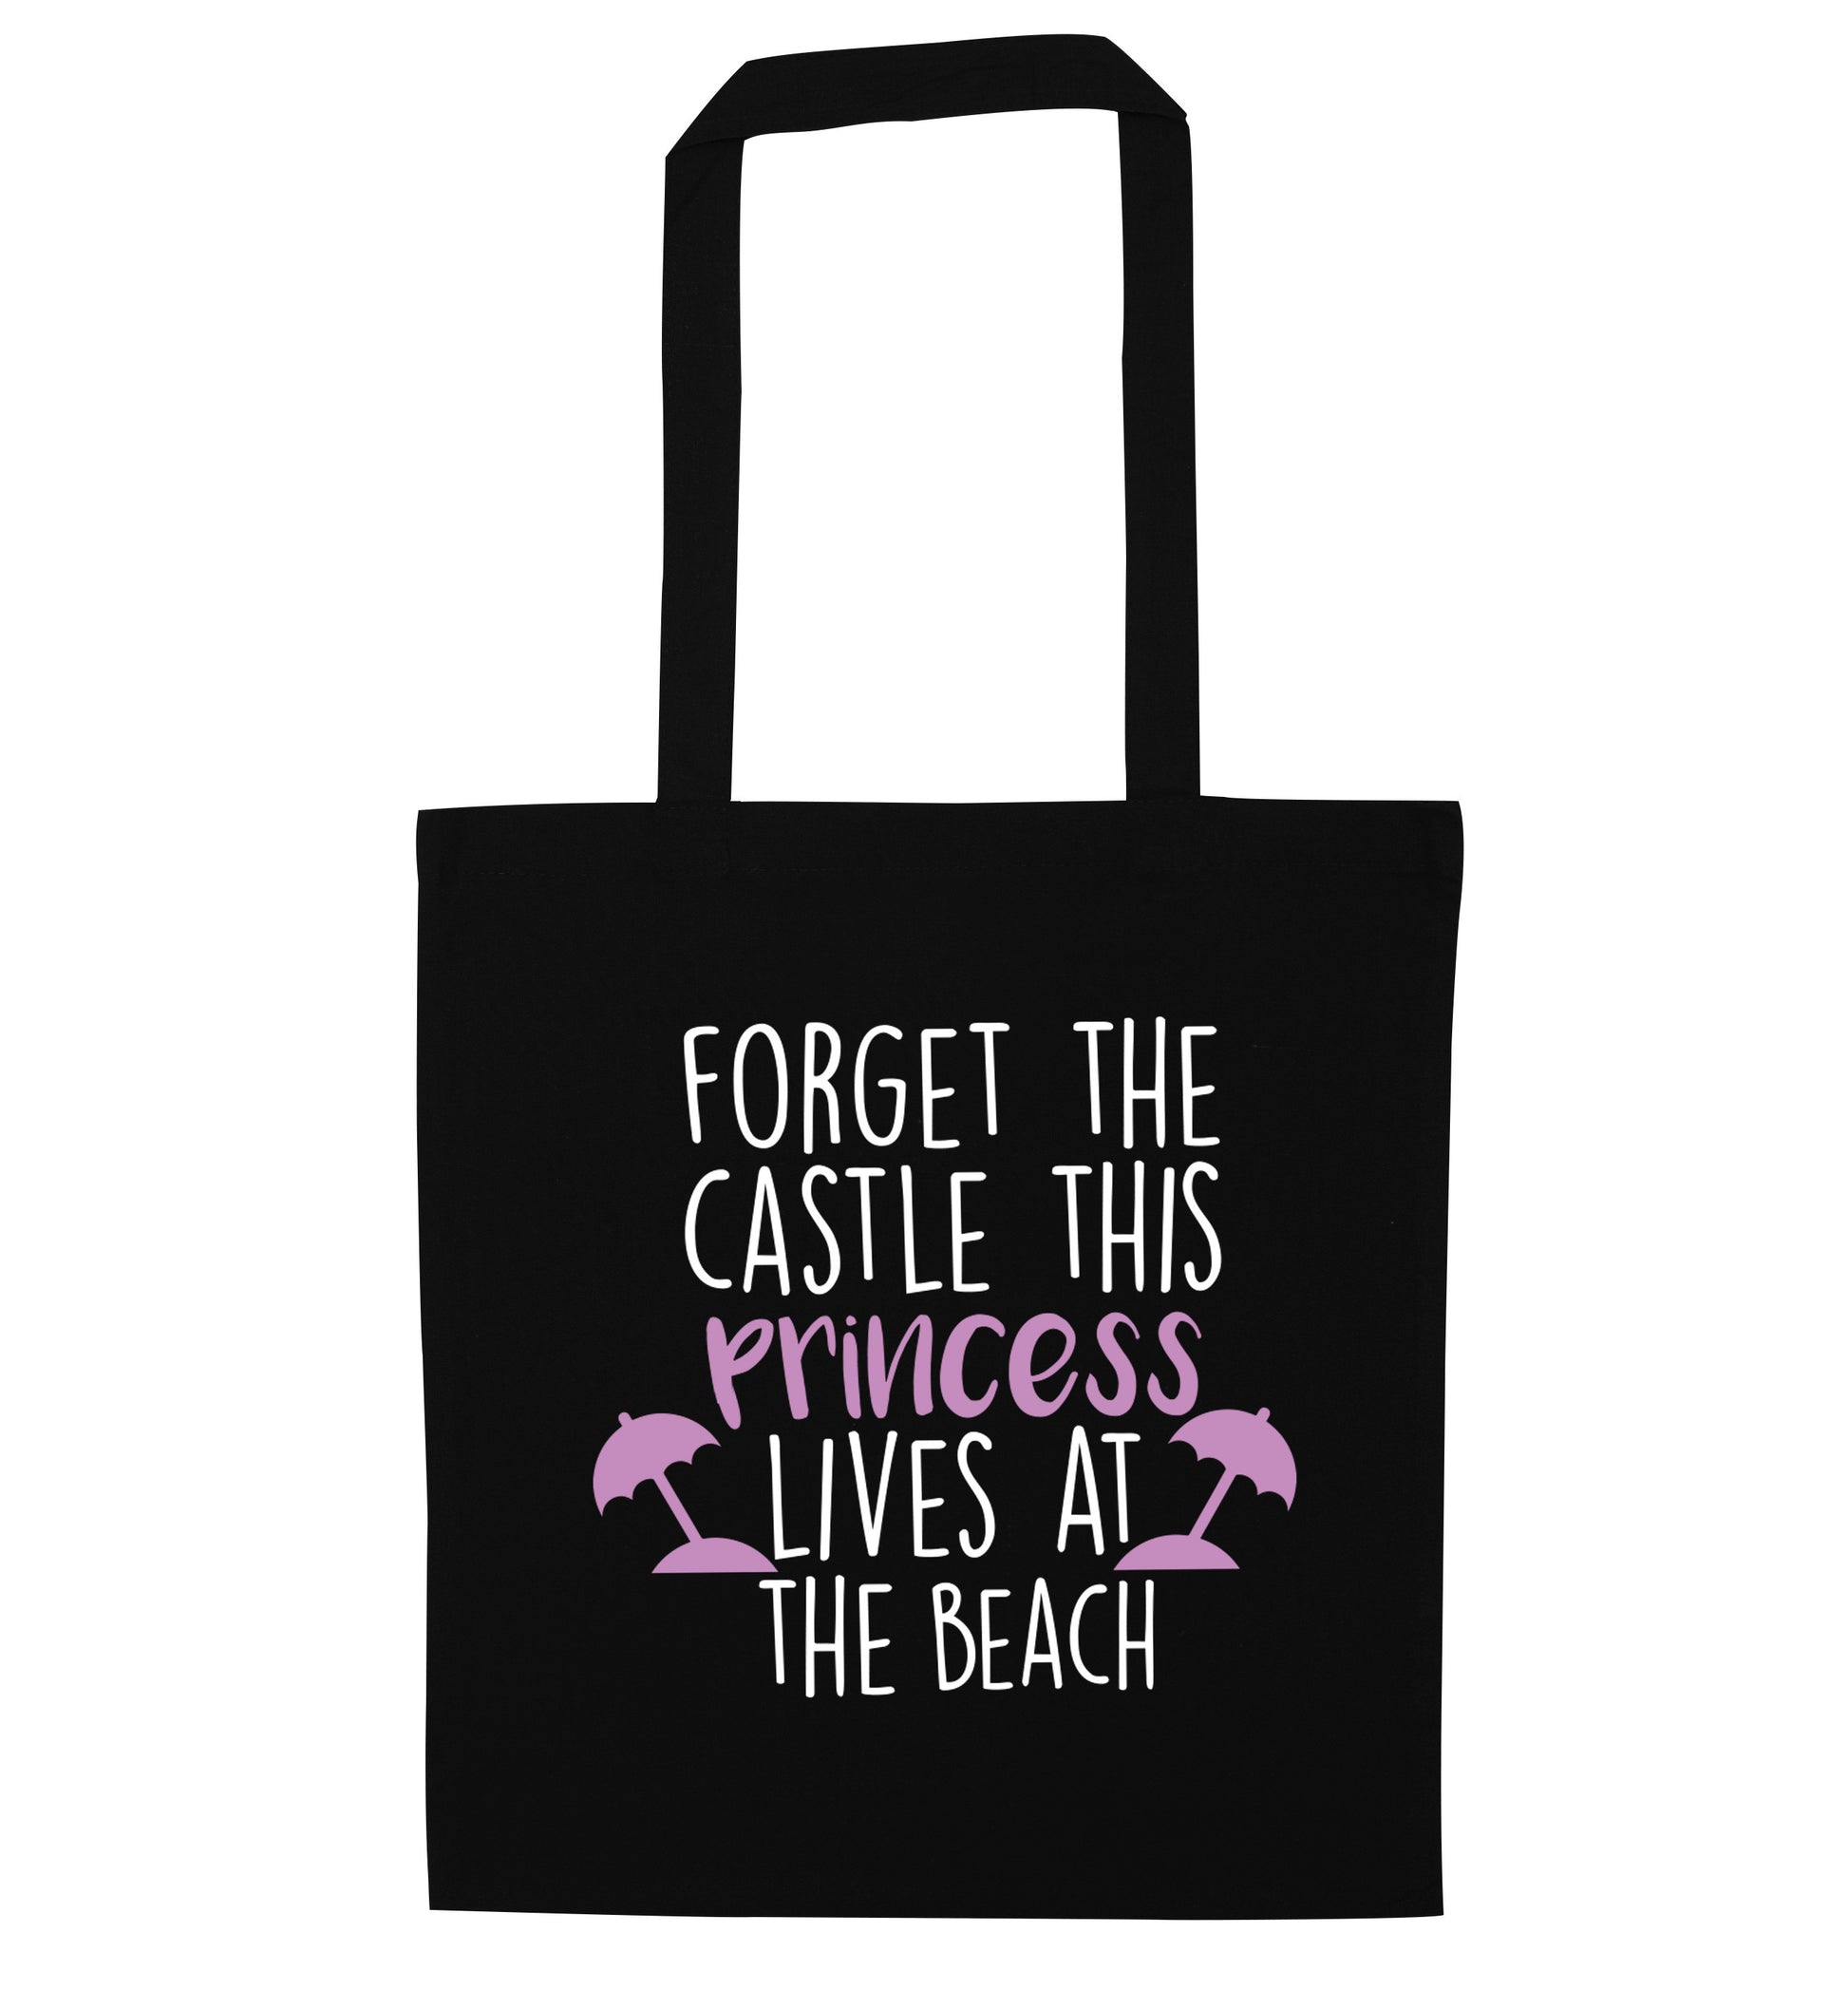 Forget the castle this princess lives at the beach black tote bag